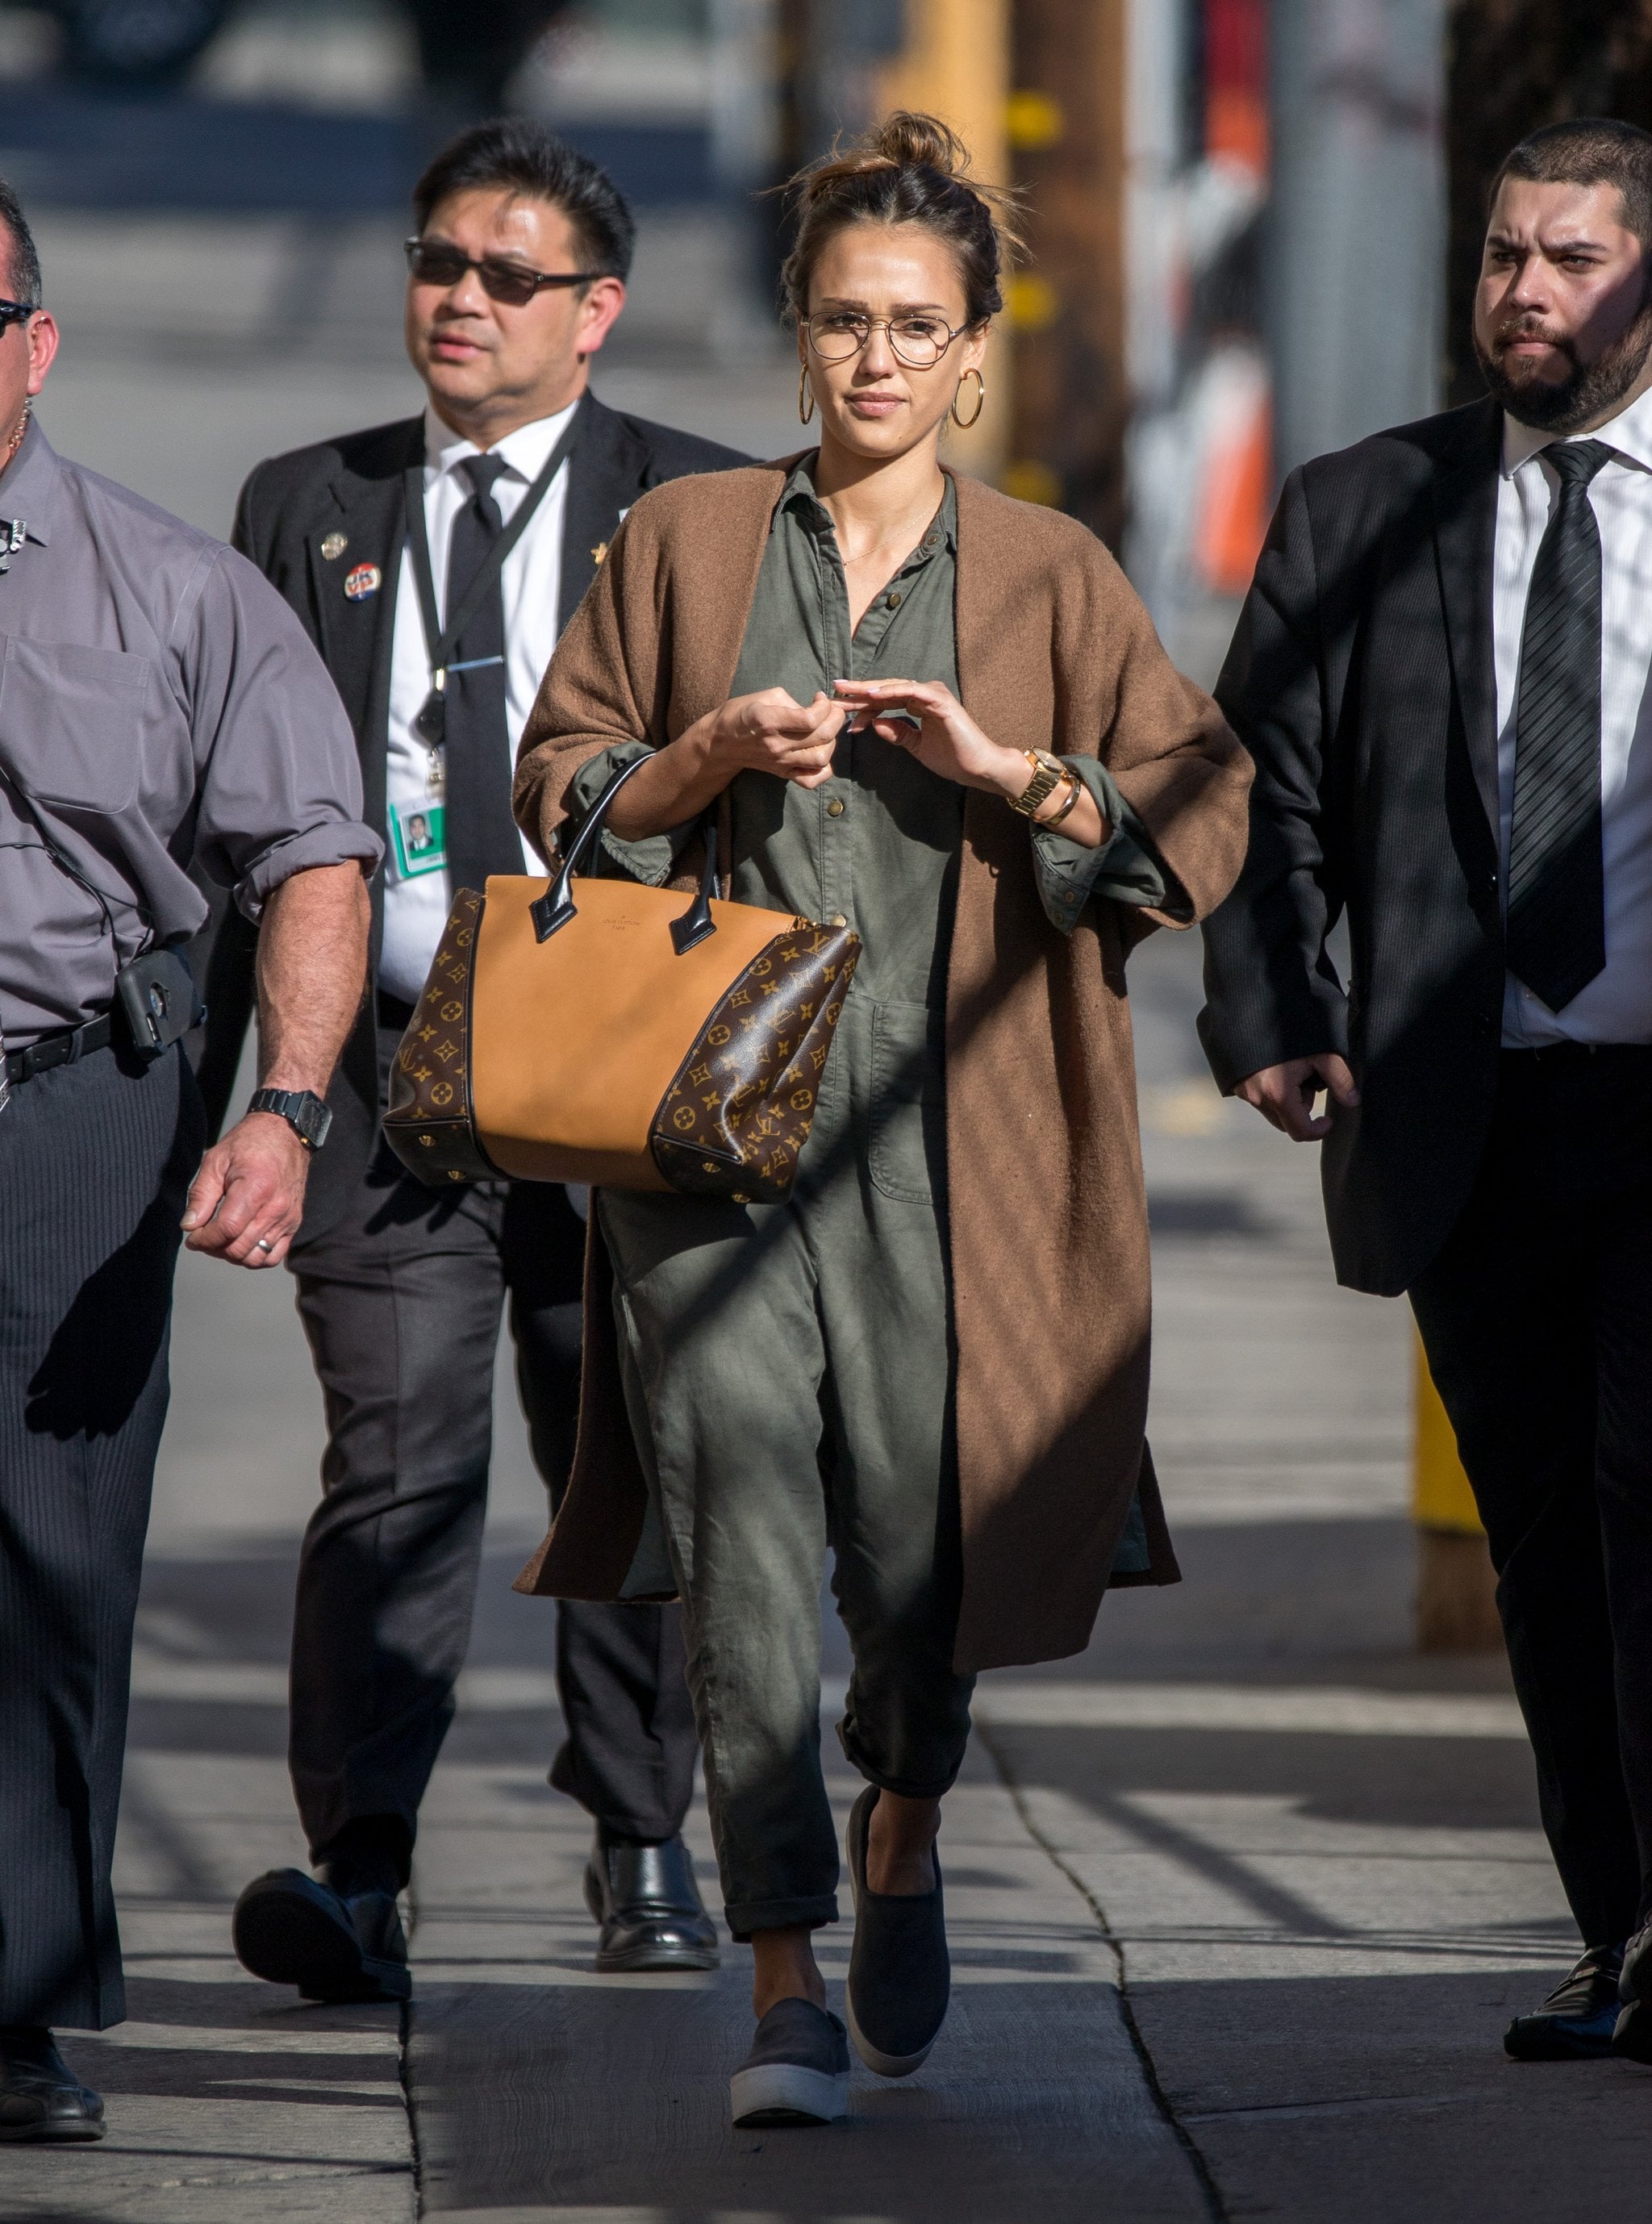 LV Twist MM Bag Outfit  Jessica alba, Celebrity style, Outfits